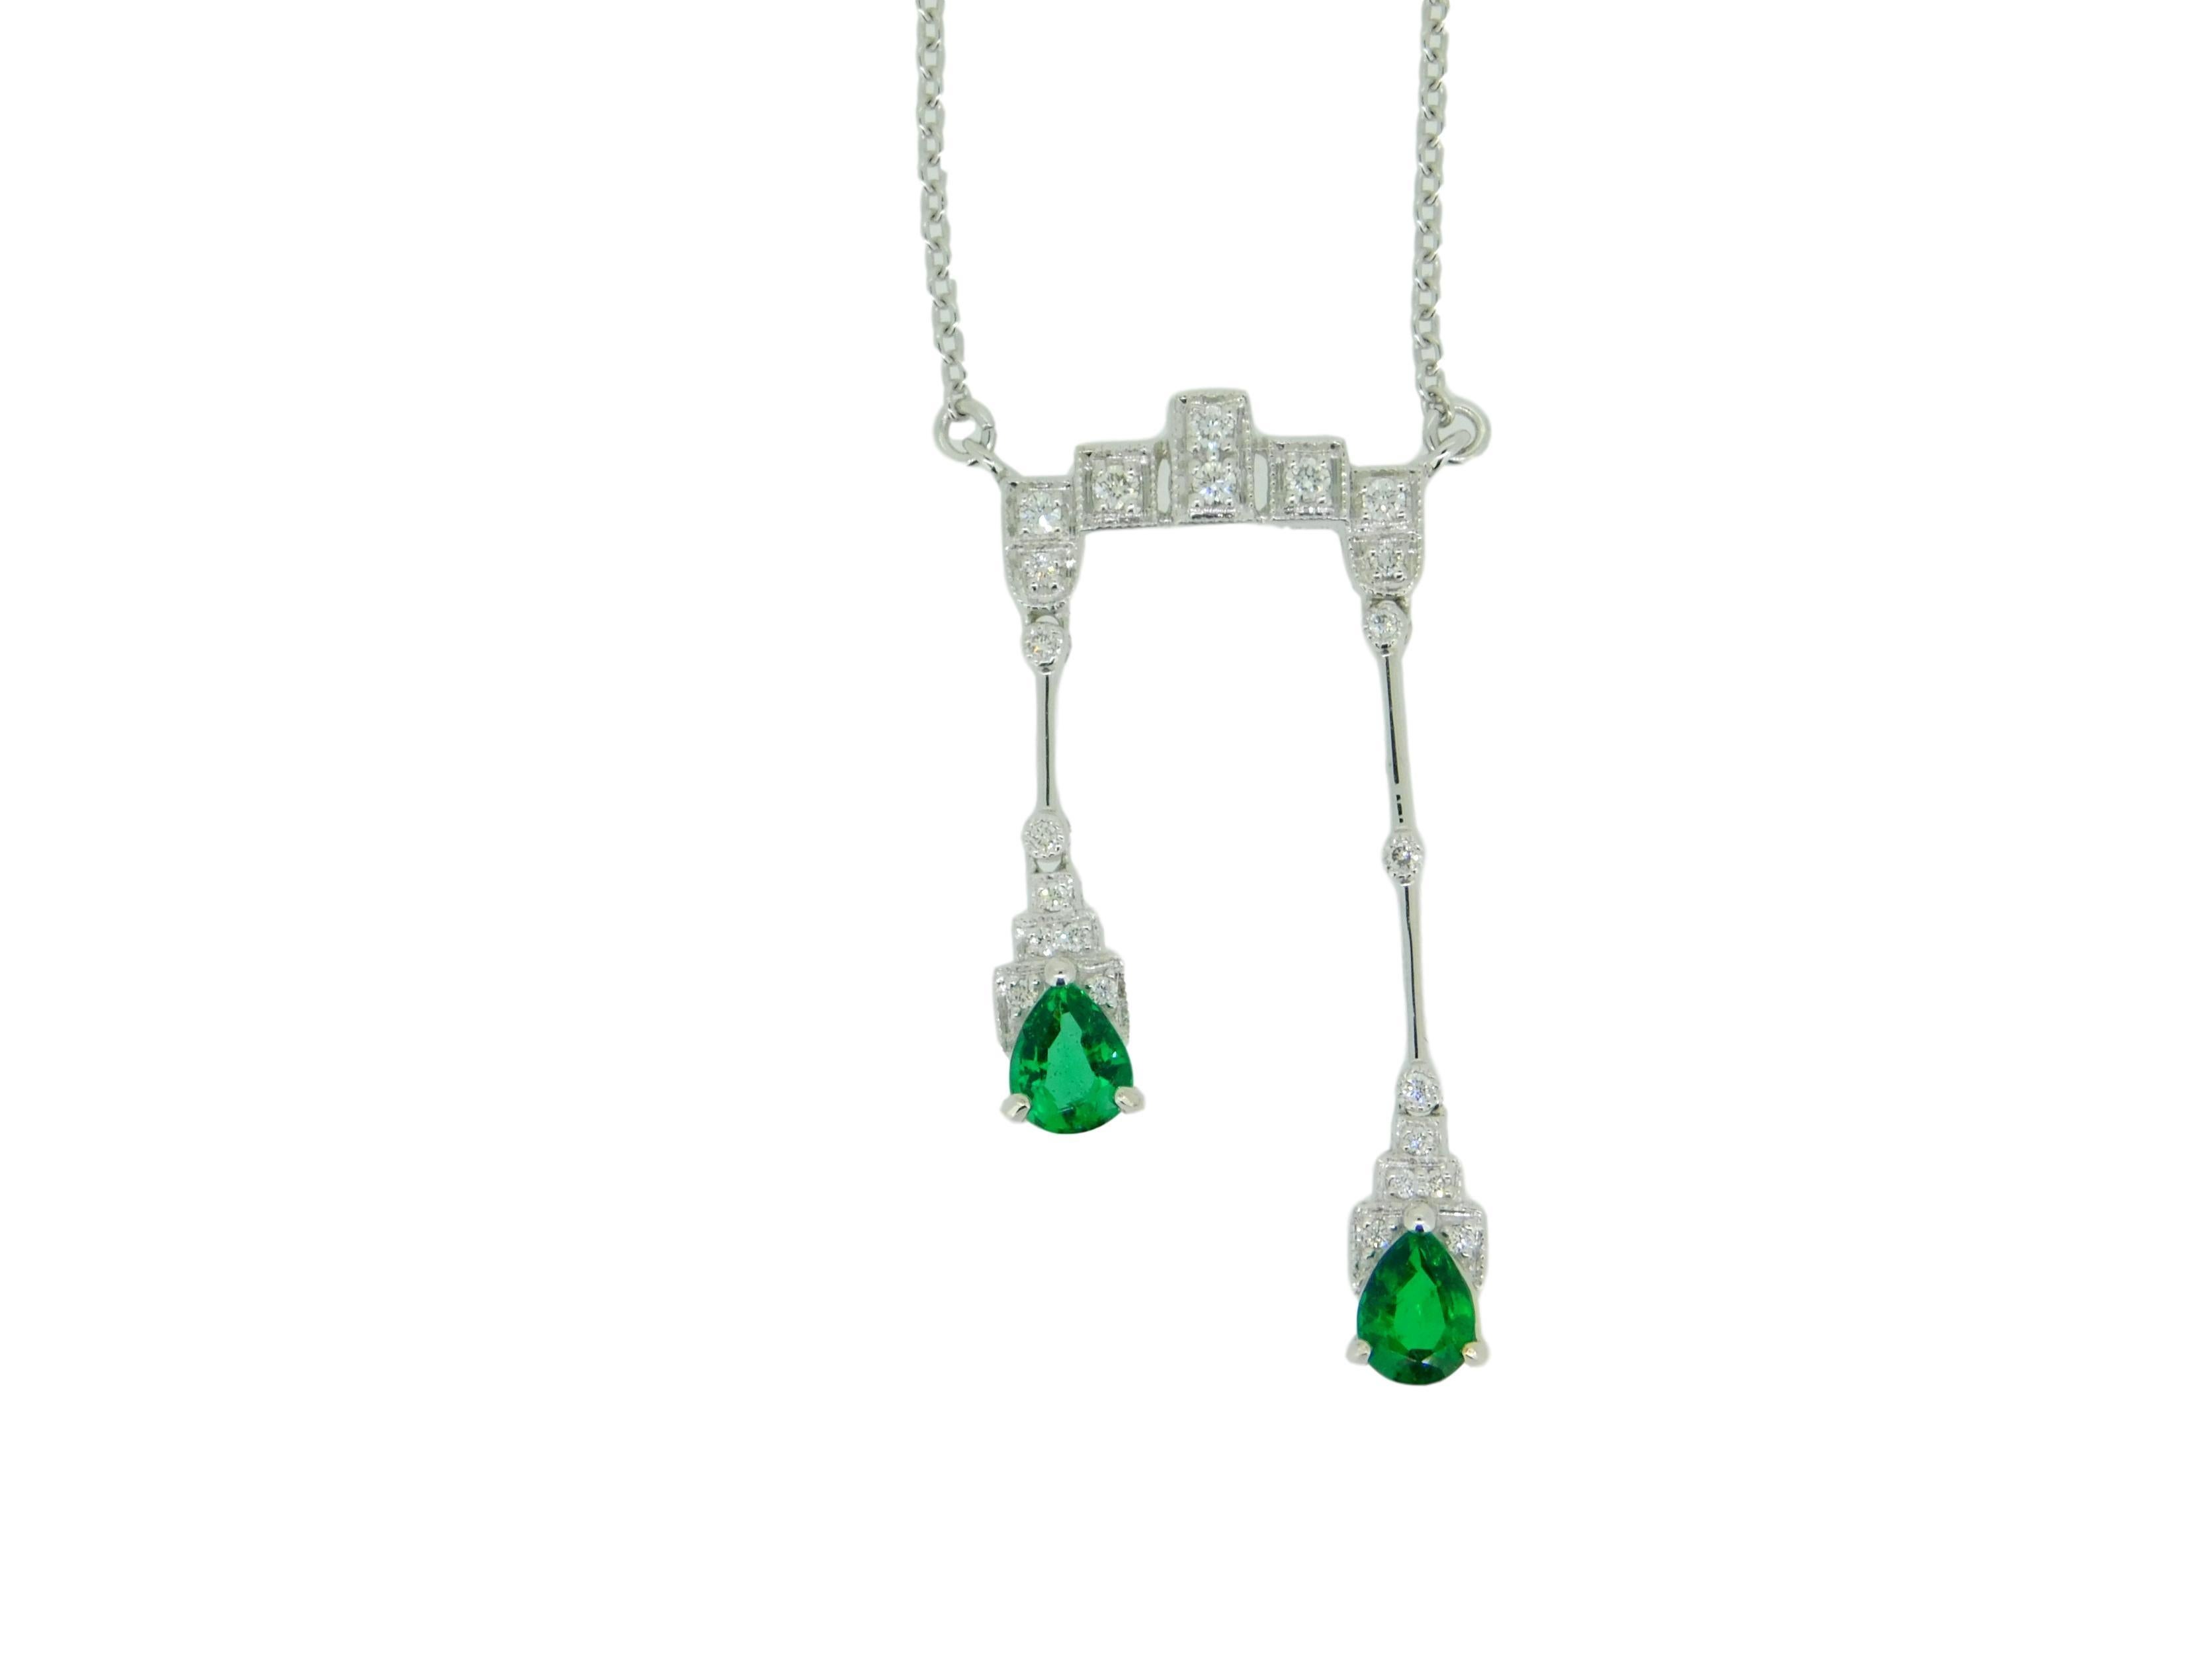 18k White Gold Double Drop Genuine Natural Emerald and Diamond Necklace (#J4715)

18k white gold necklace featuring two drops with pear shape emeralds weighing .57cts total. The emeralds are fine quality and have medium dark green color. The